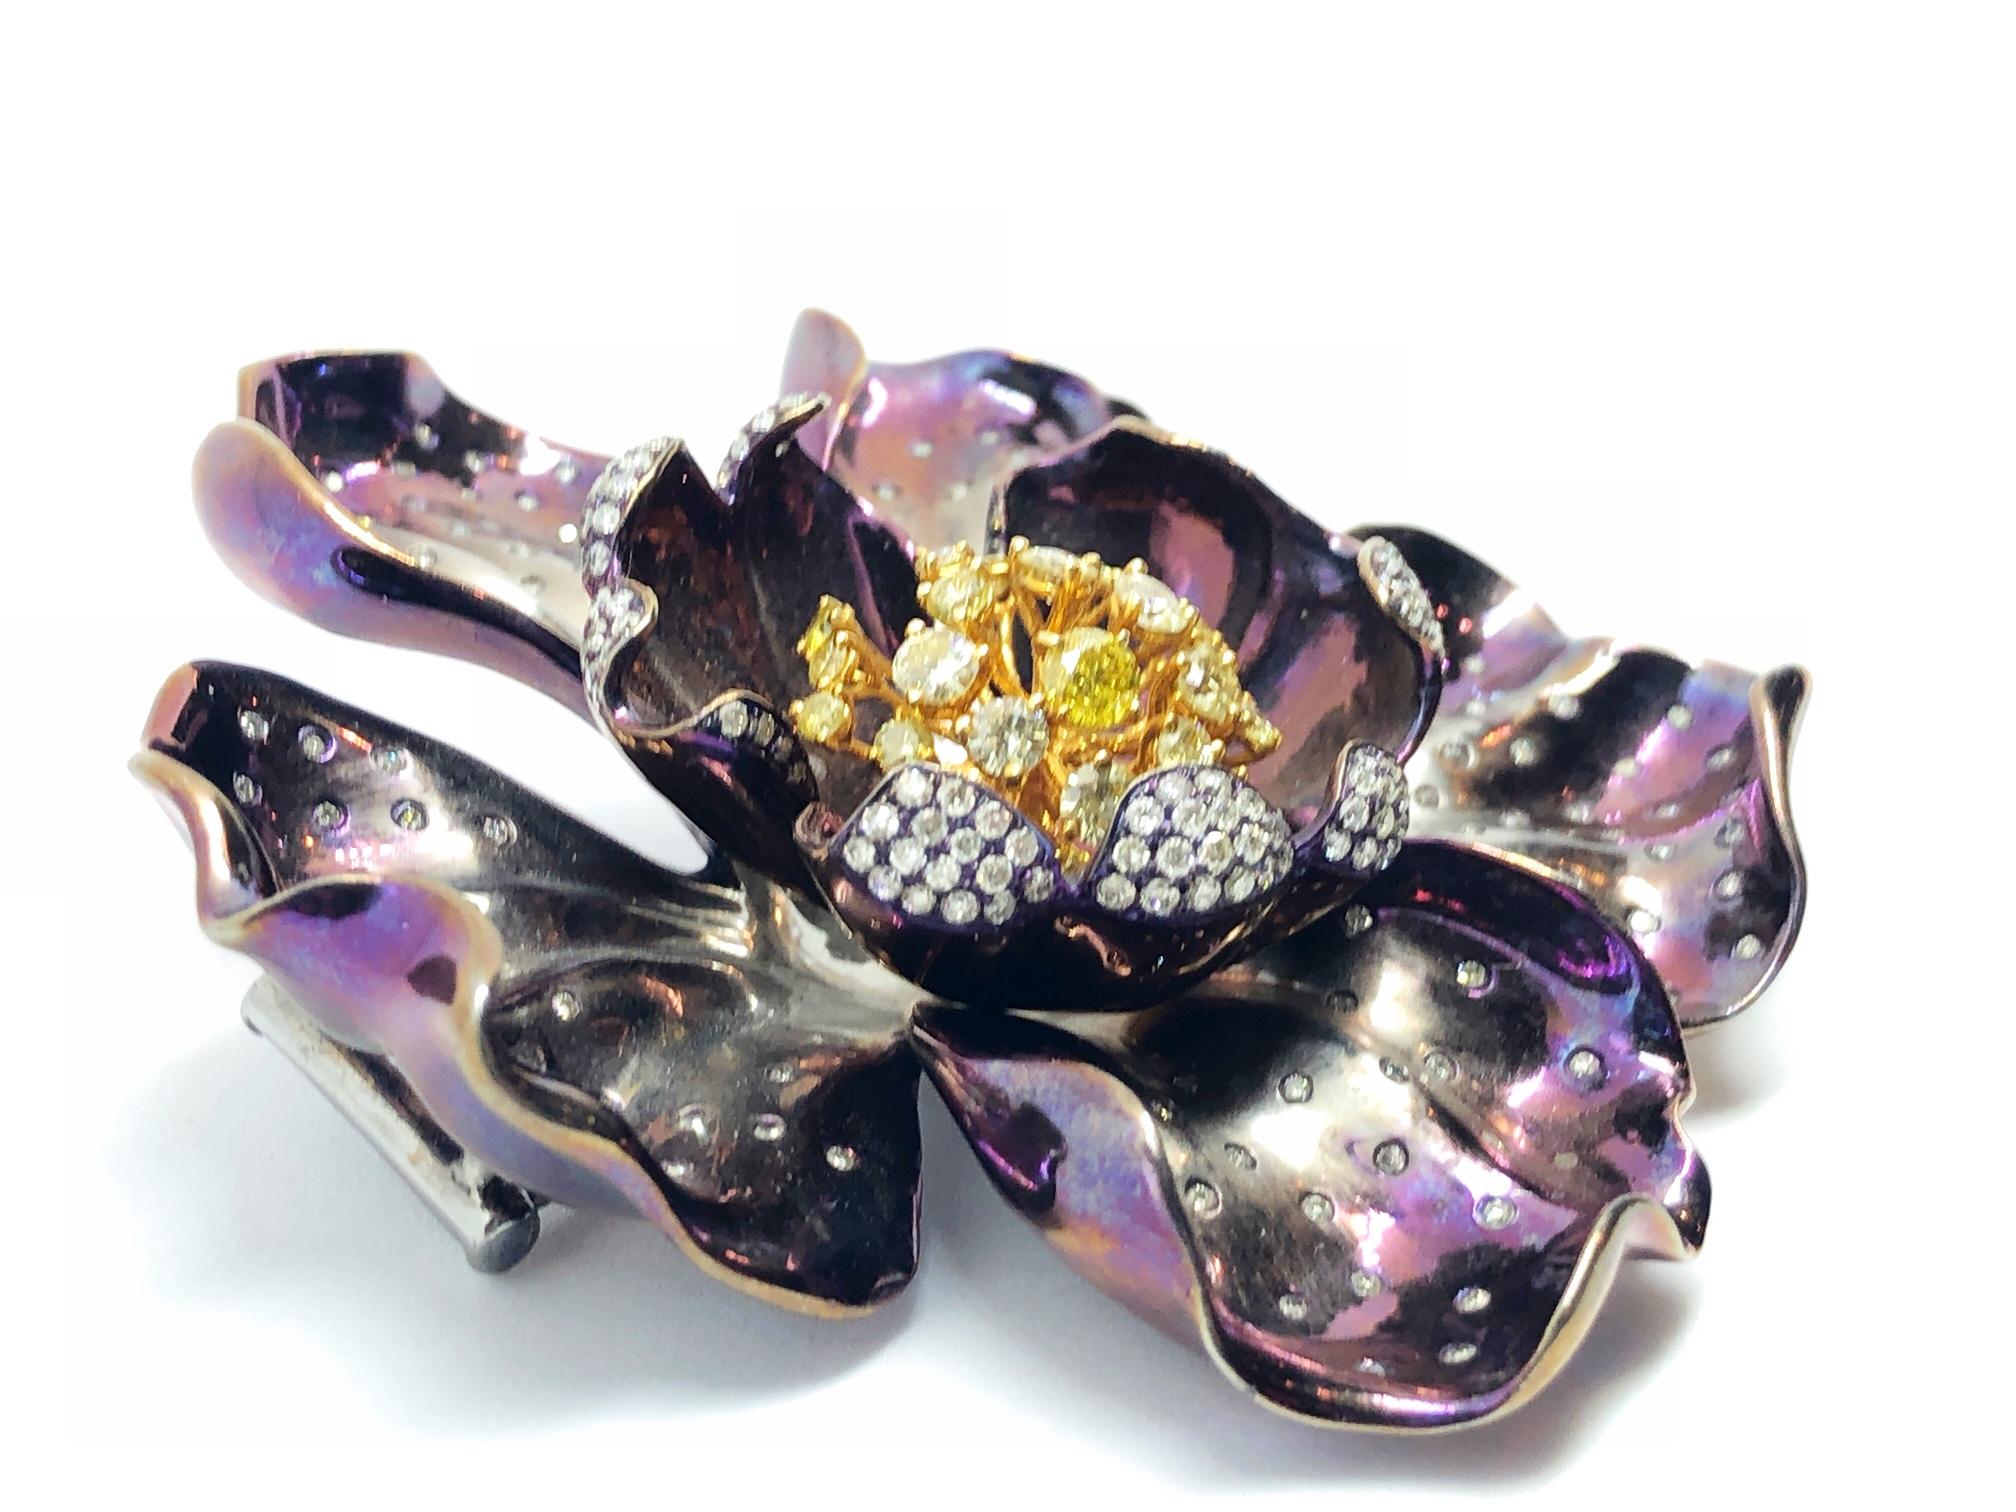 A purple flower brooch, mounted in titanium, with five shaded purple to silver outer petals set with round brilliant-cut diamonds, and three inner petals set with round brilliant-cut diamonds on the edges of each petal, with white and yellow